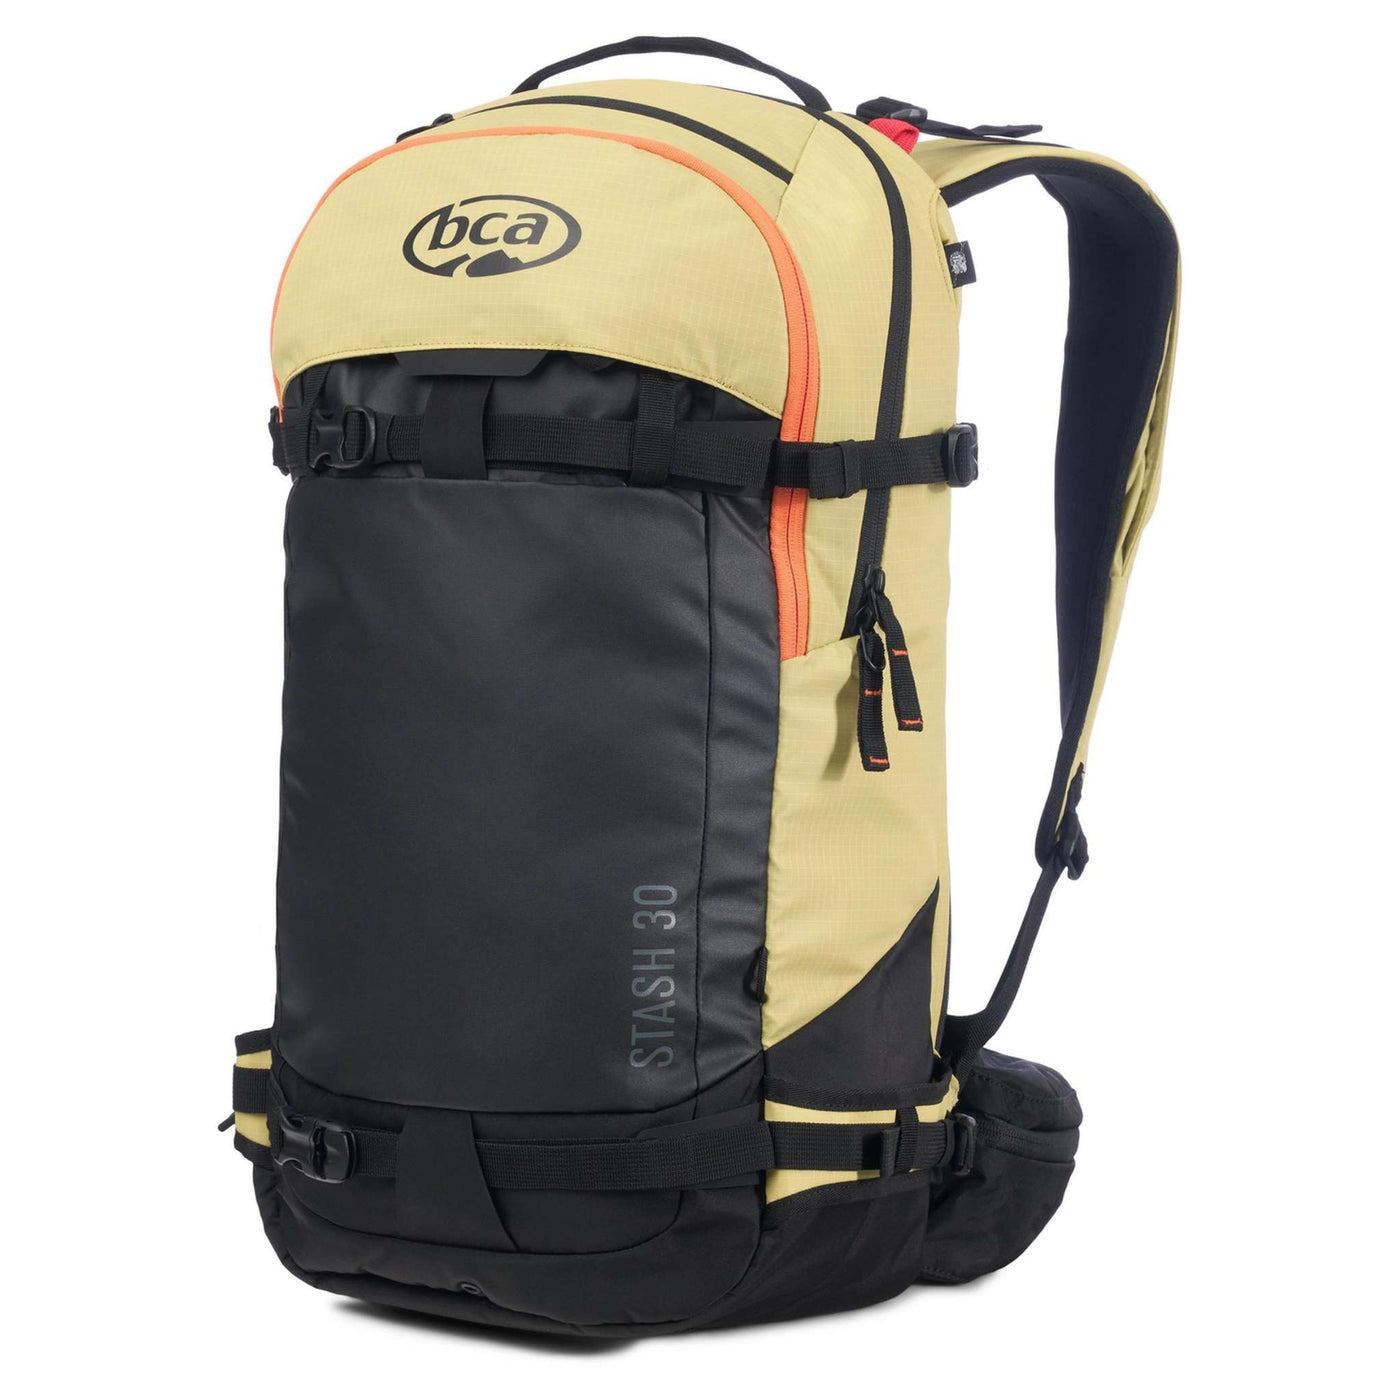 Backcountry Access Stash Backpack - 30L | Ski Touring Backpacks | Further Faster Christchurch NZ #tan 